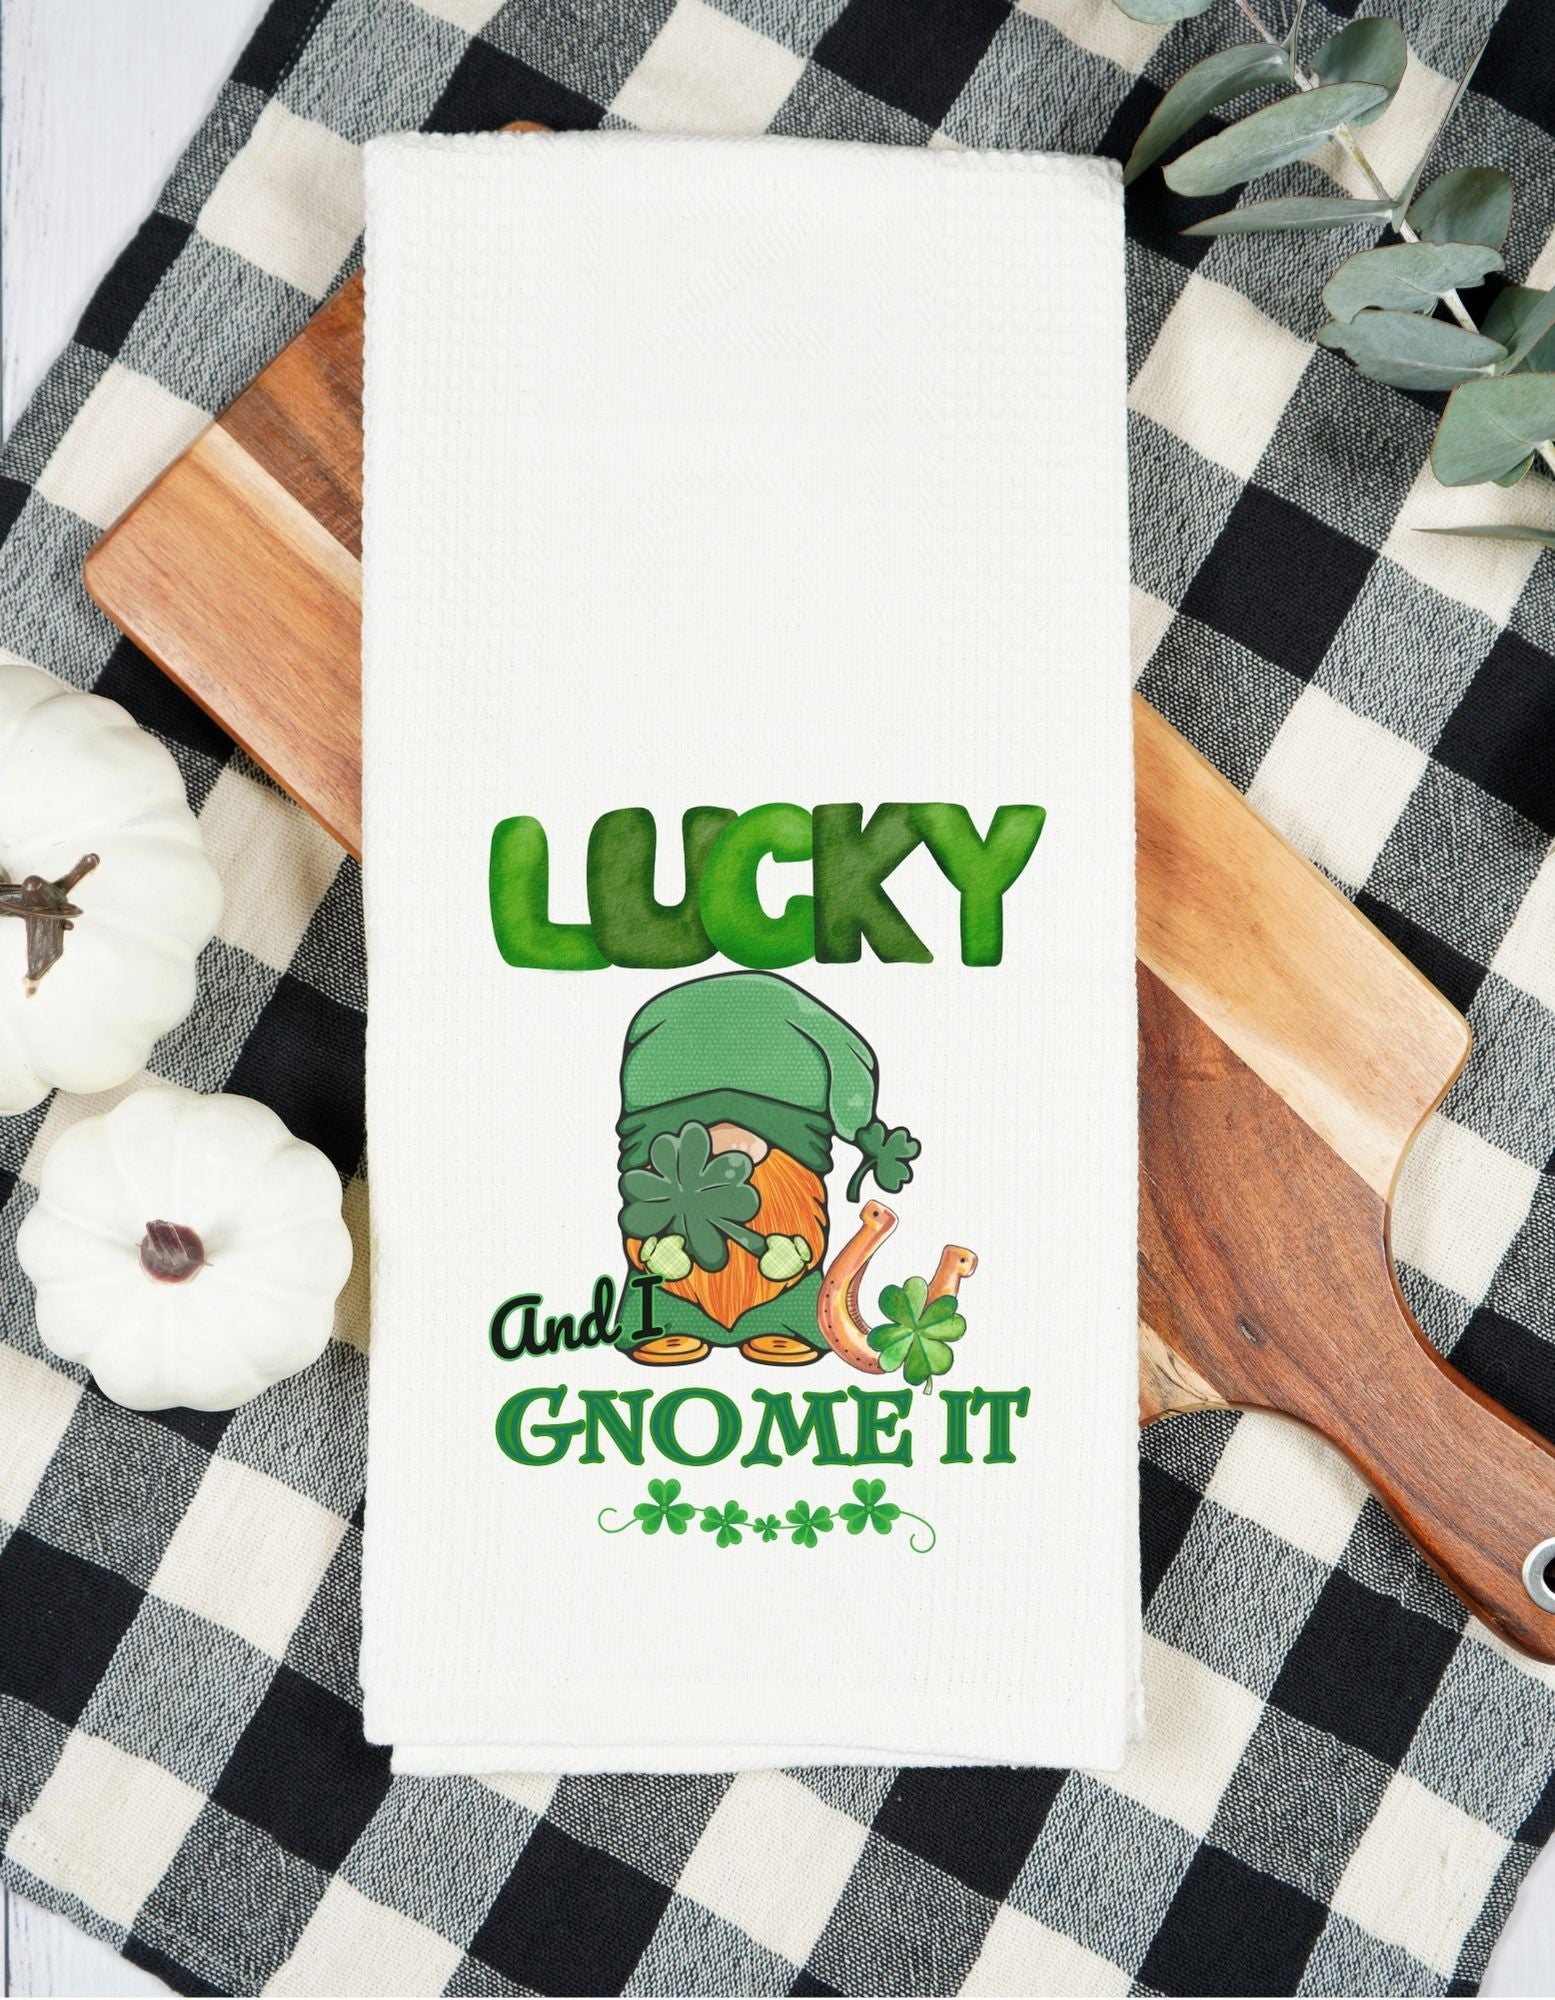 Lucky and I Gnome it Microfiber Waffle Weave Kitchen Towel for St. Patrick's Day Decor